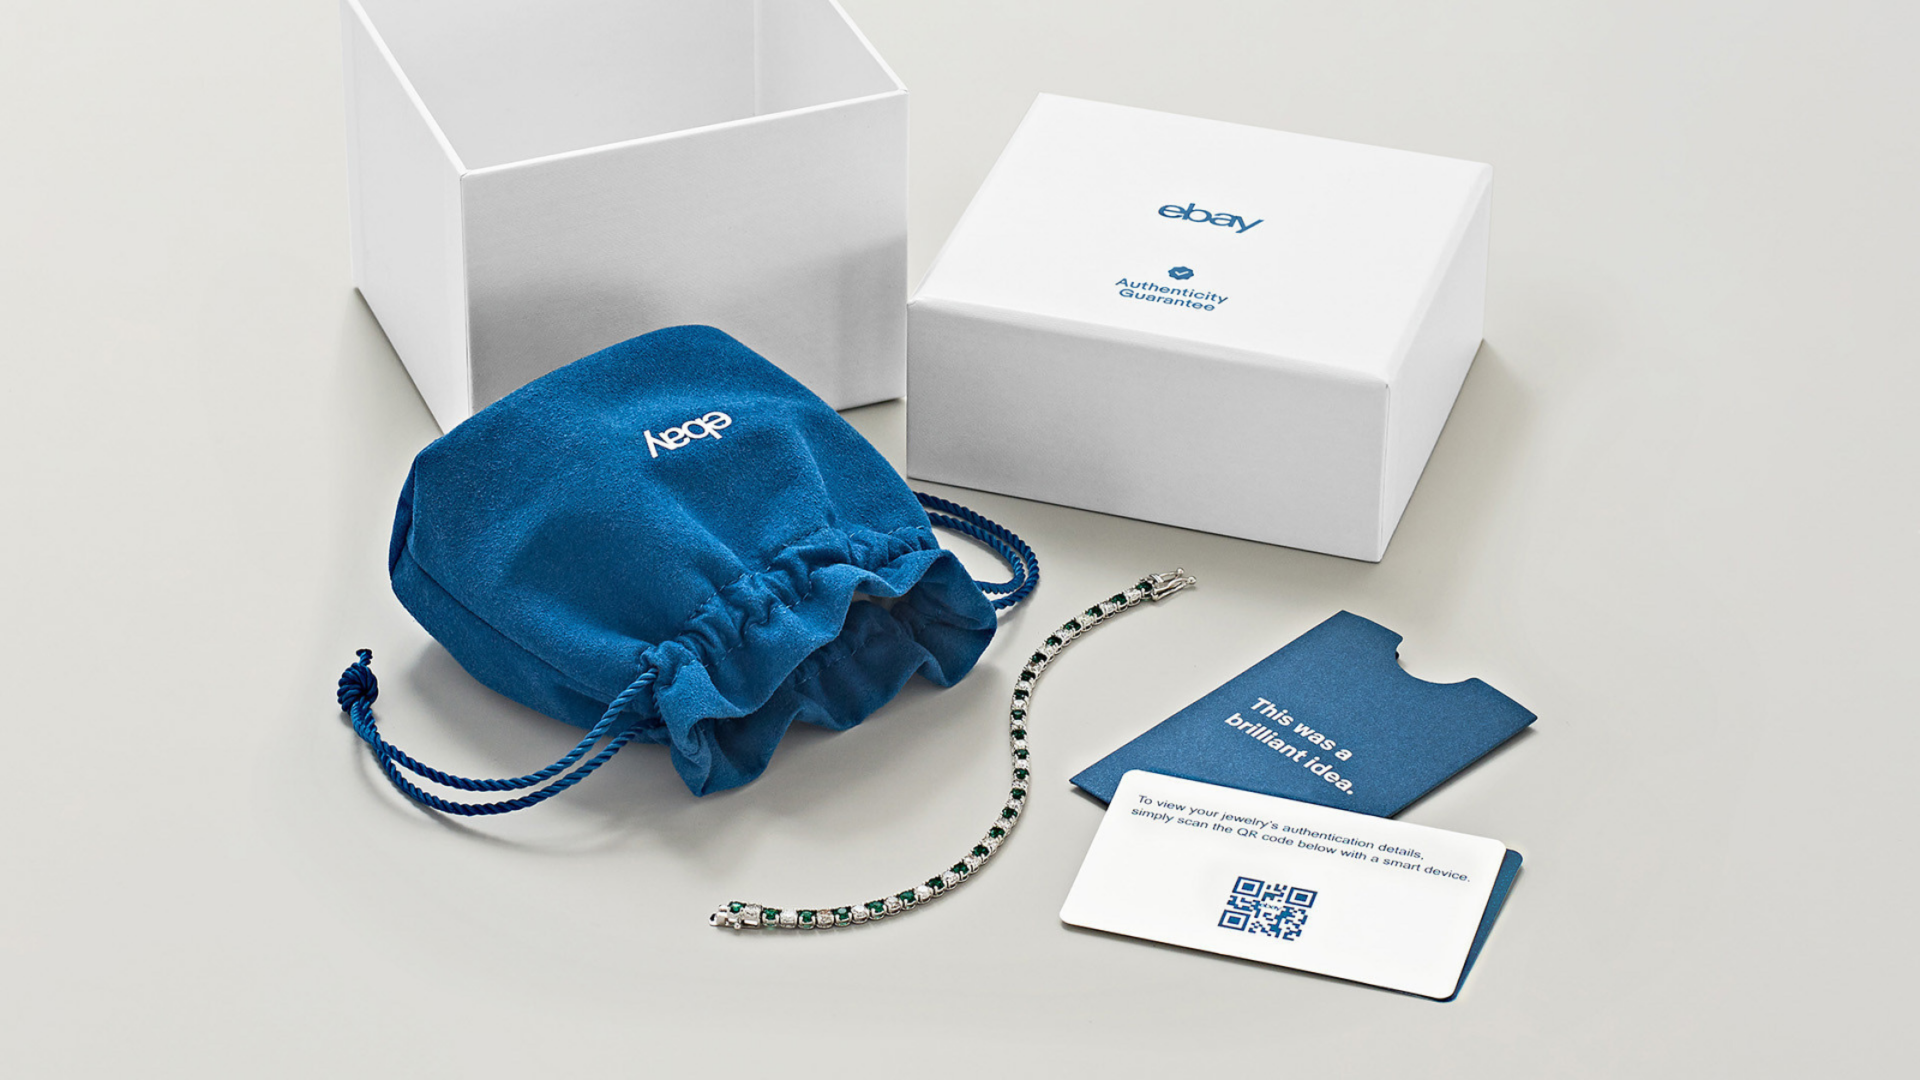 eBay Launches Authentication for Fine Jewelry